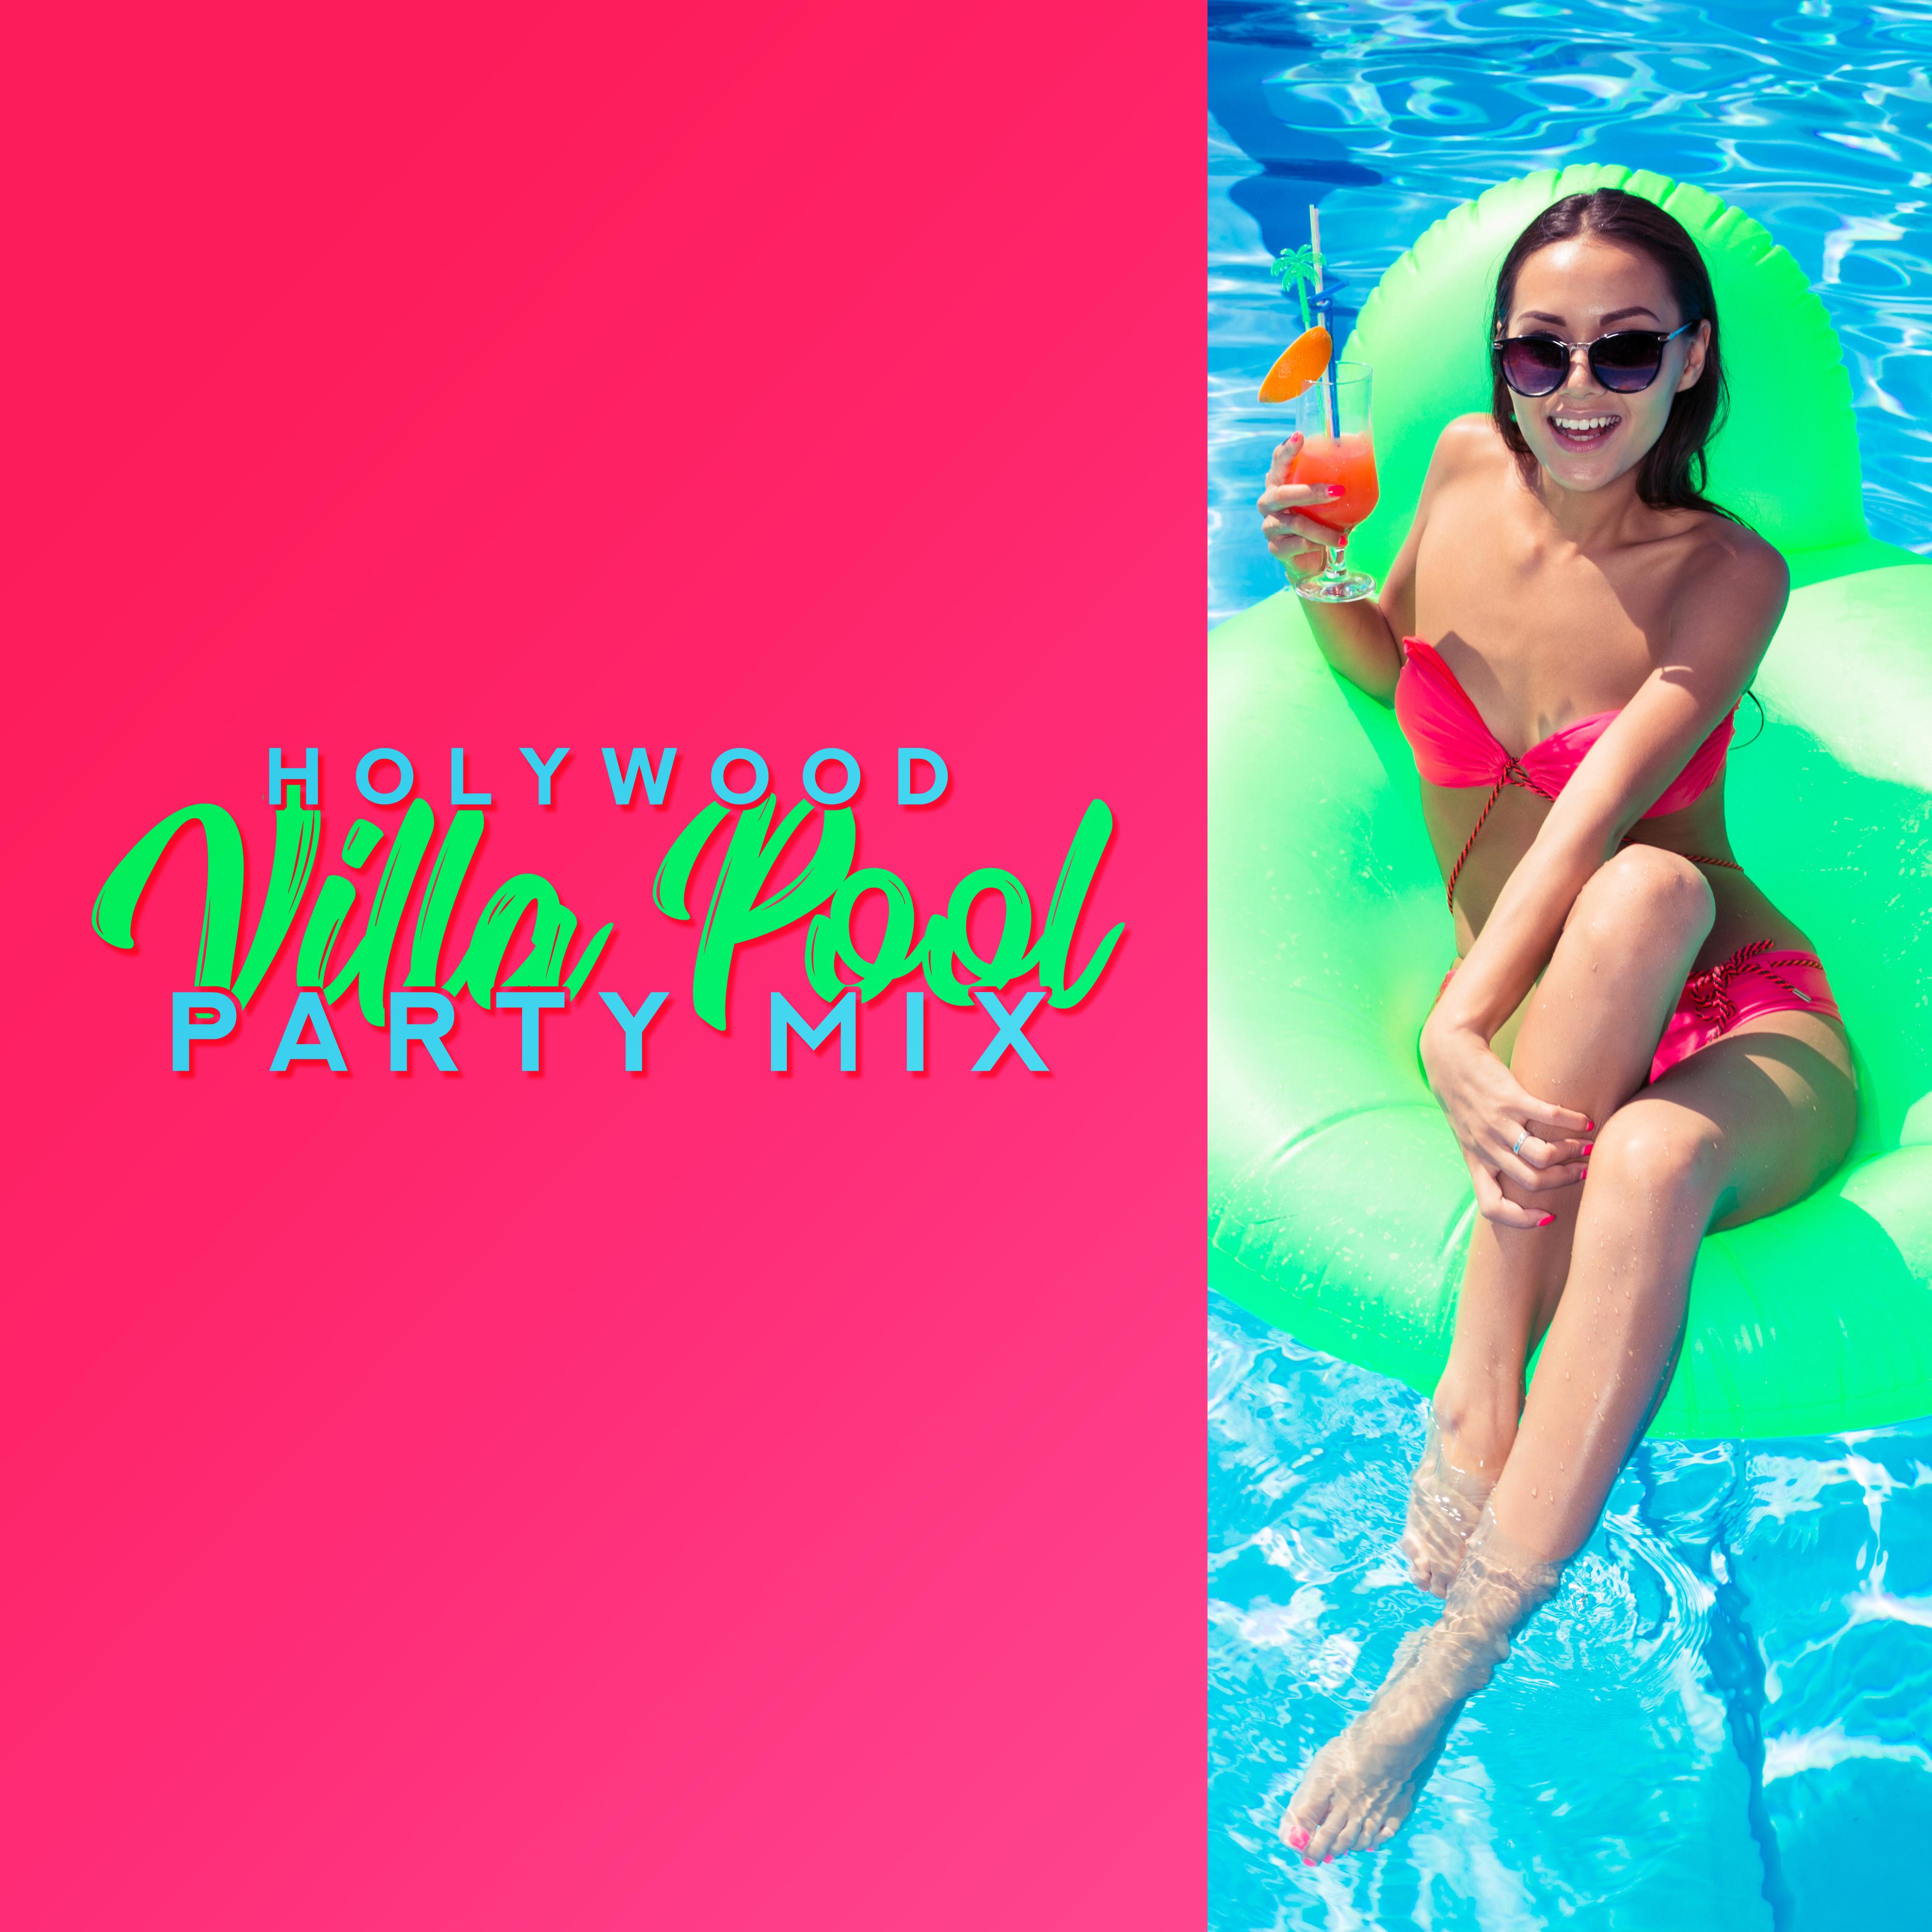 Holywood Villa Pool Party Mix: 2019 Chillout Electronic Vibes for Dance Party, Deep Dynamic Beats Perfect for Mansion, Pool or Beach House Party